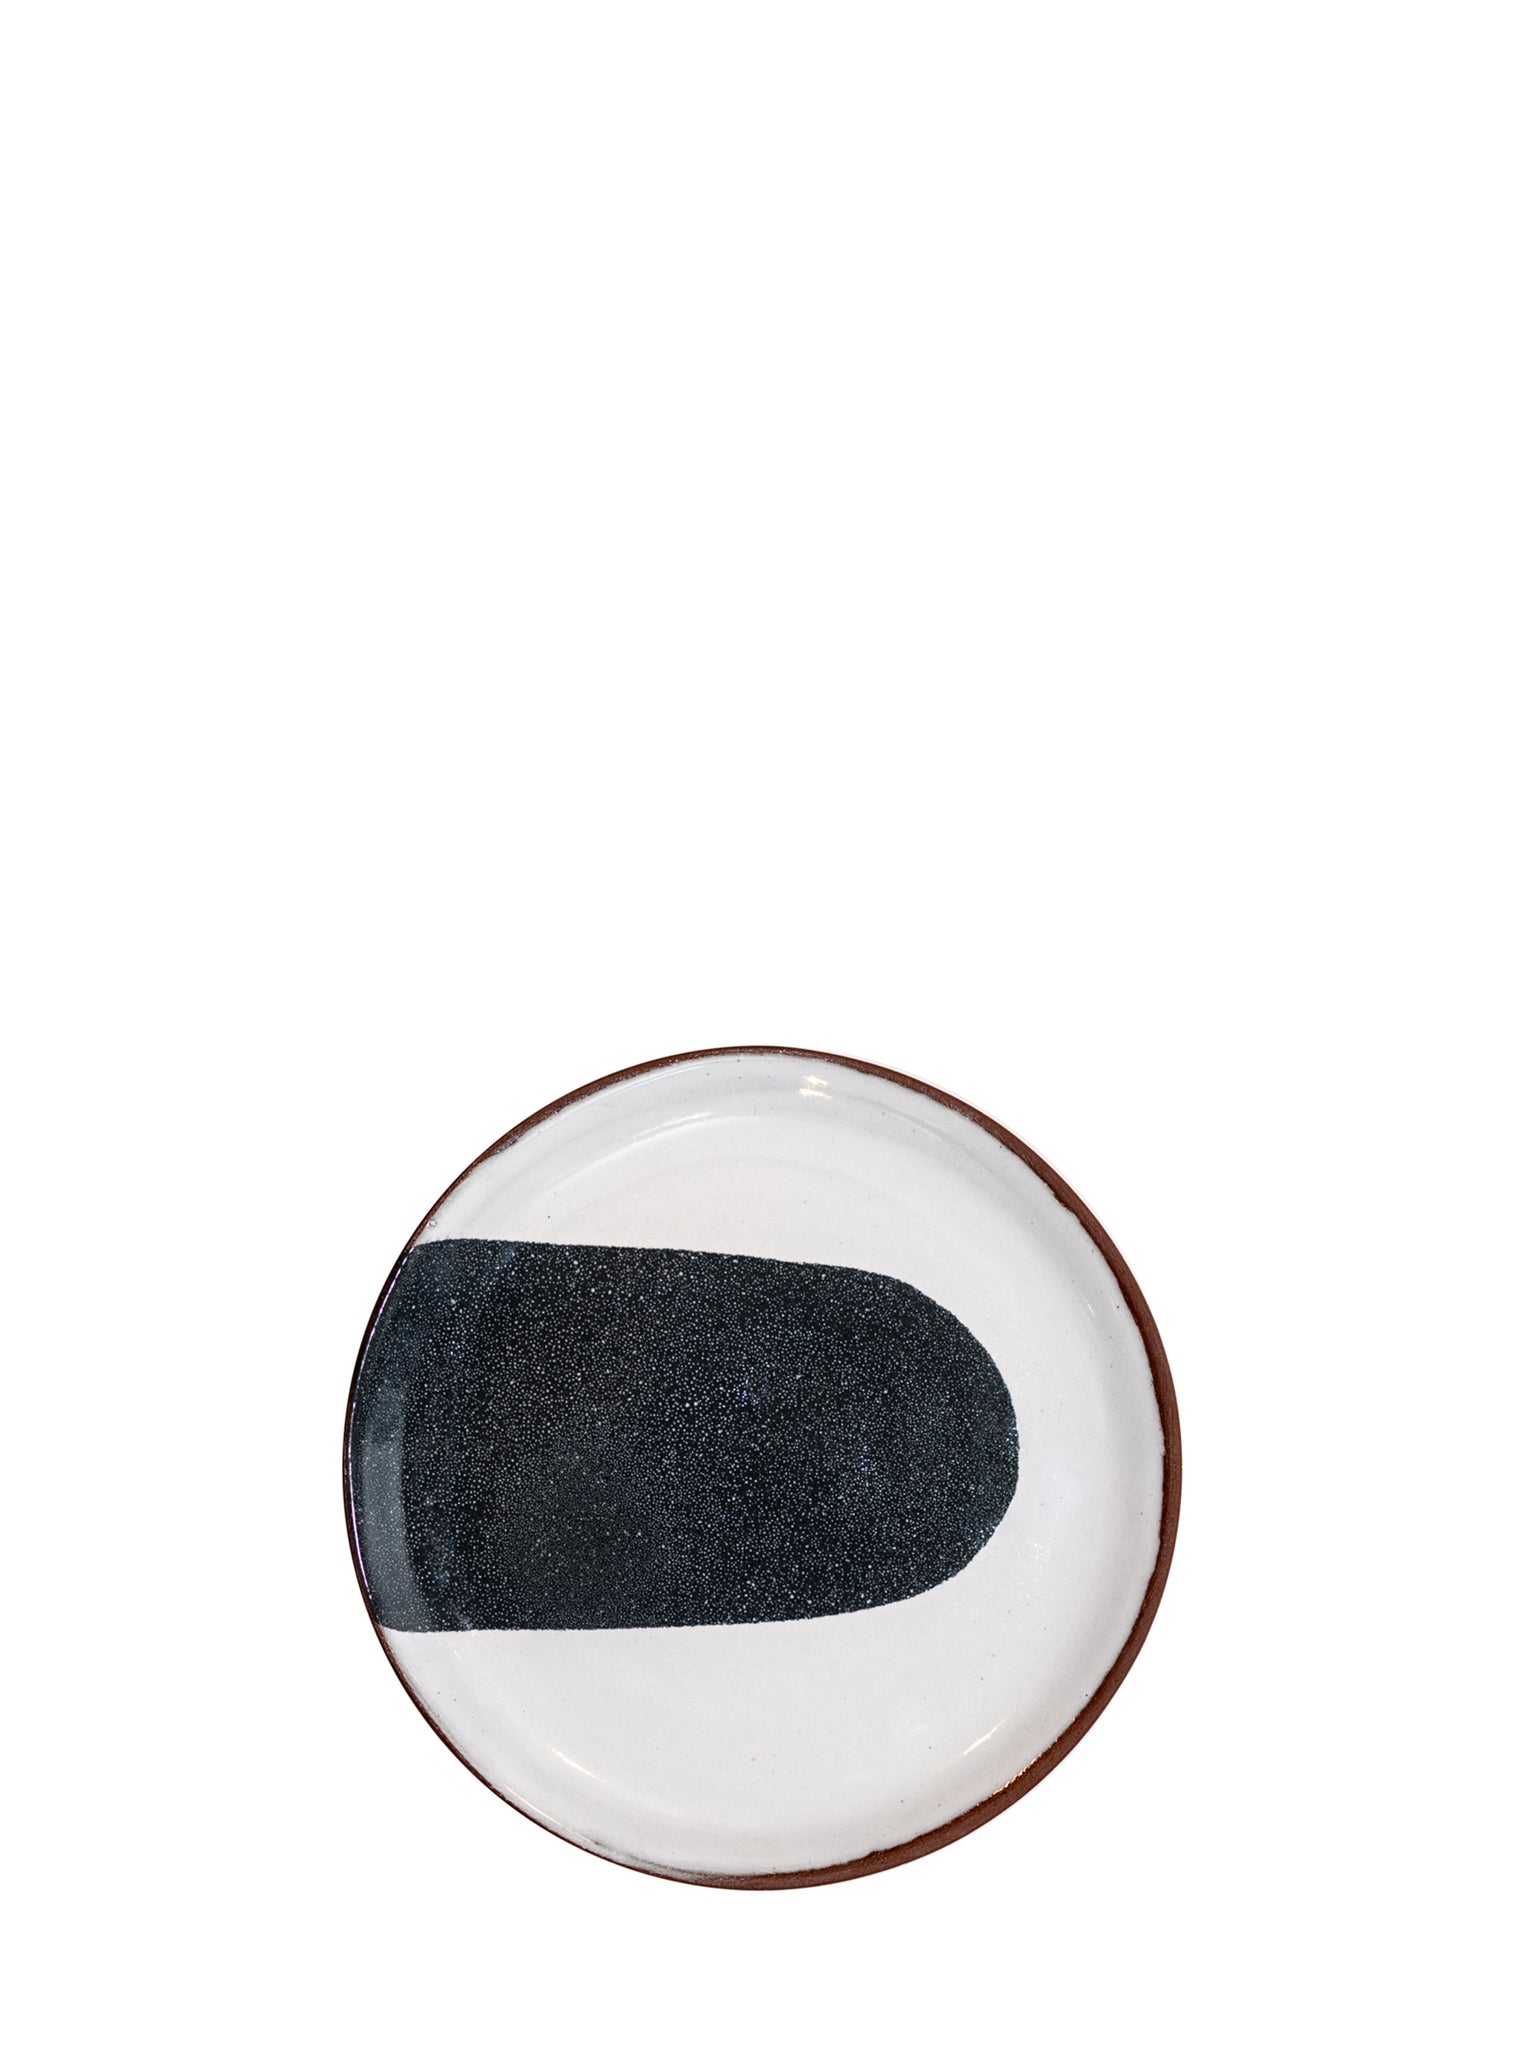 Silvia K handmade terracotta small plate with white and black decor